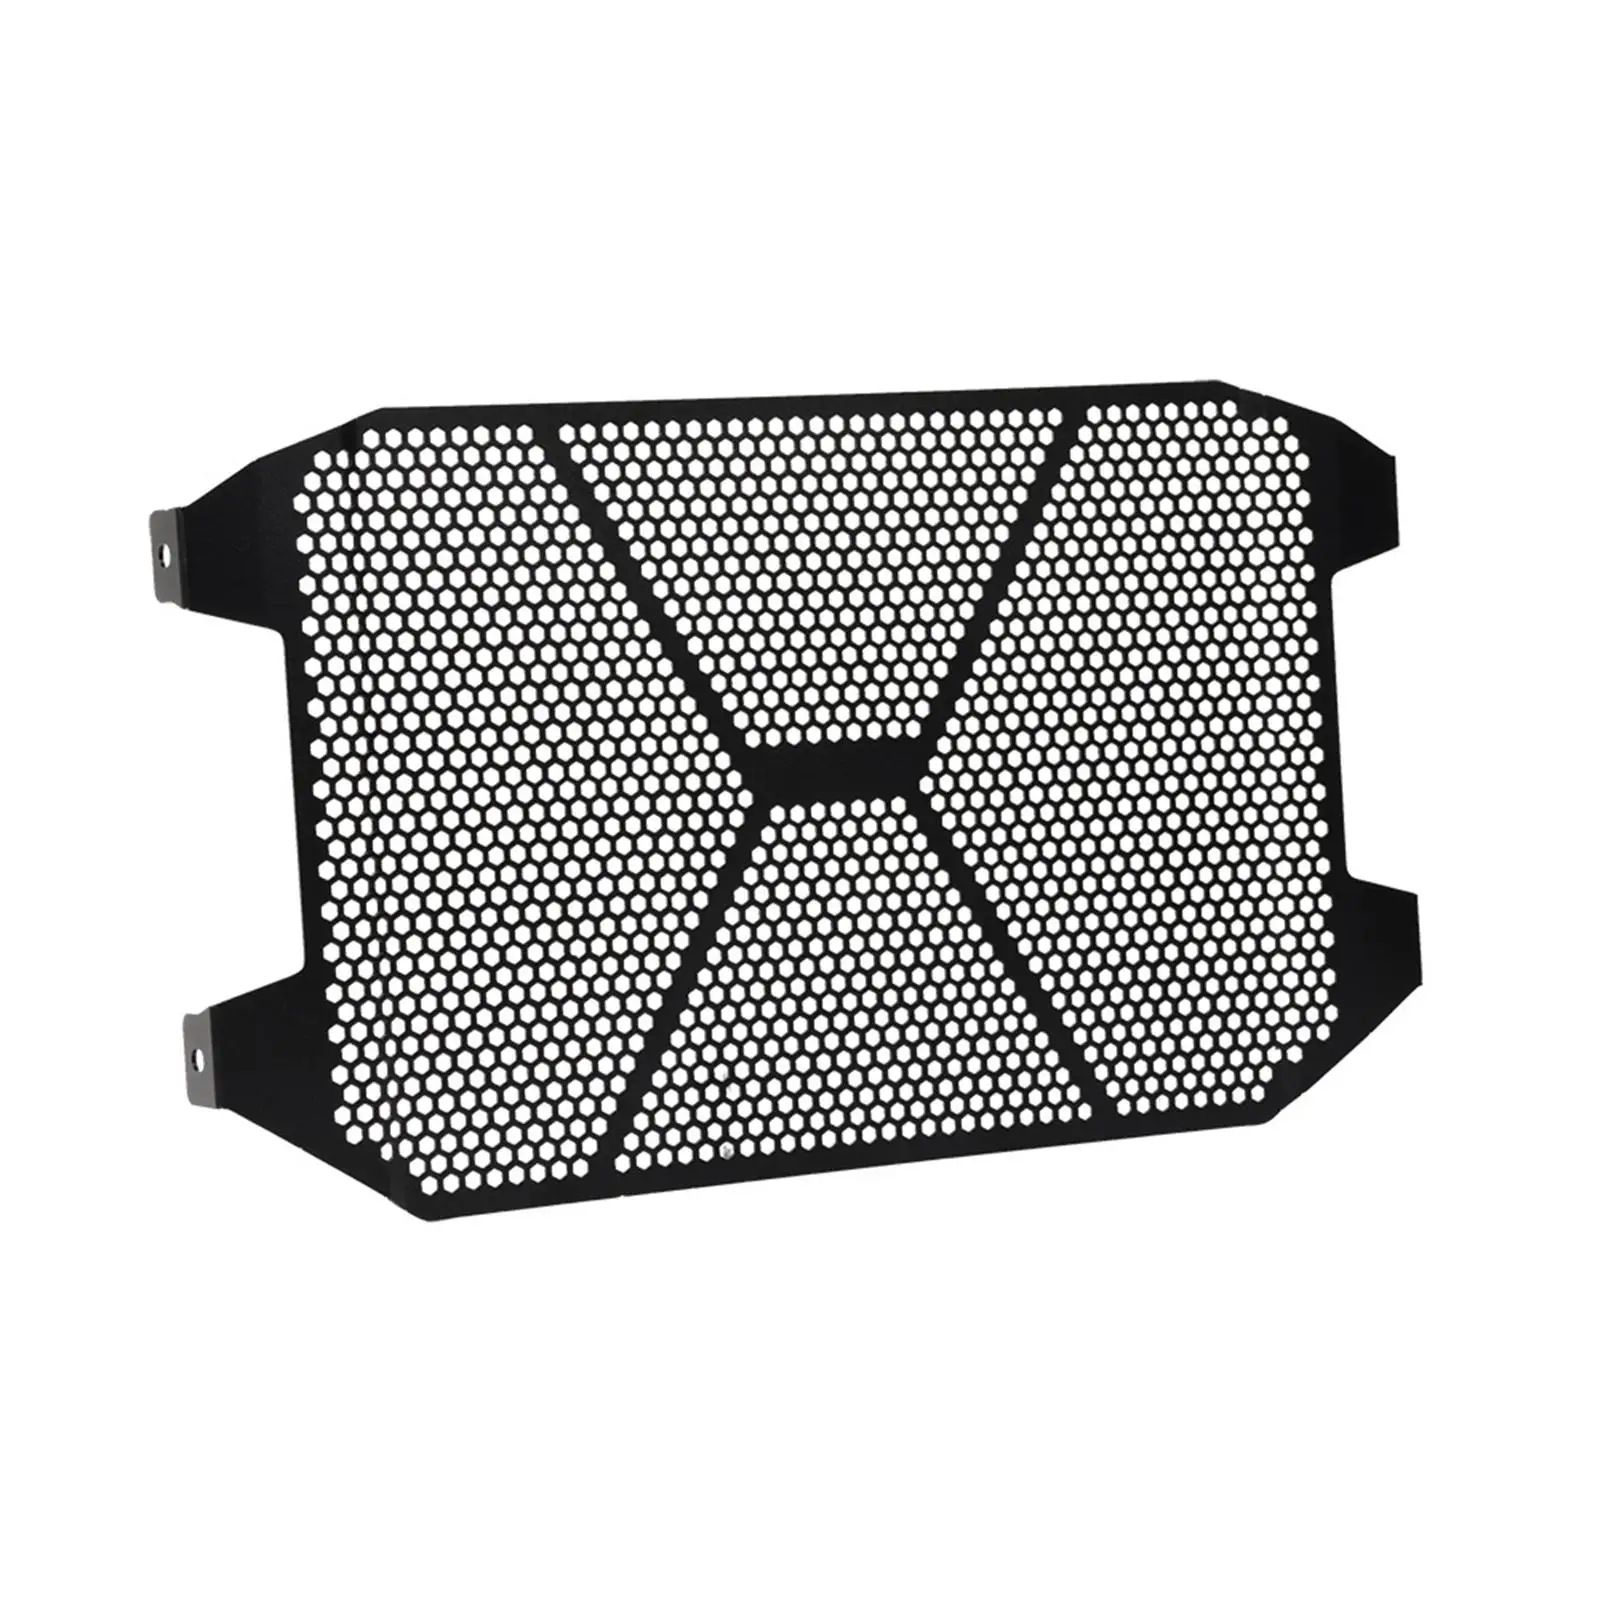 Radiator Grille Guard Cover Protector Long Service Life Premium Easy to Install